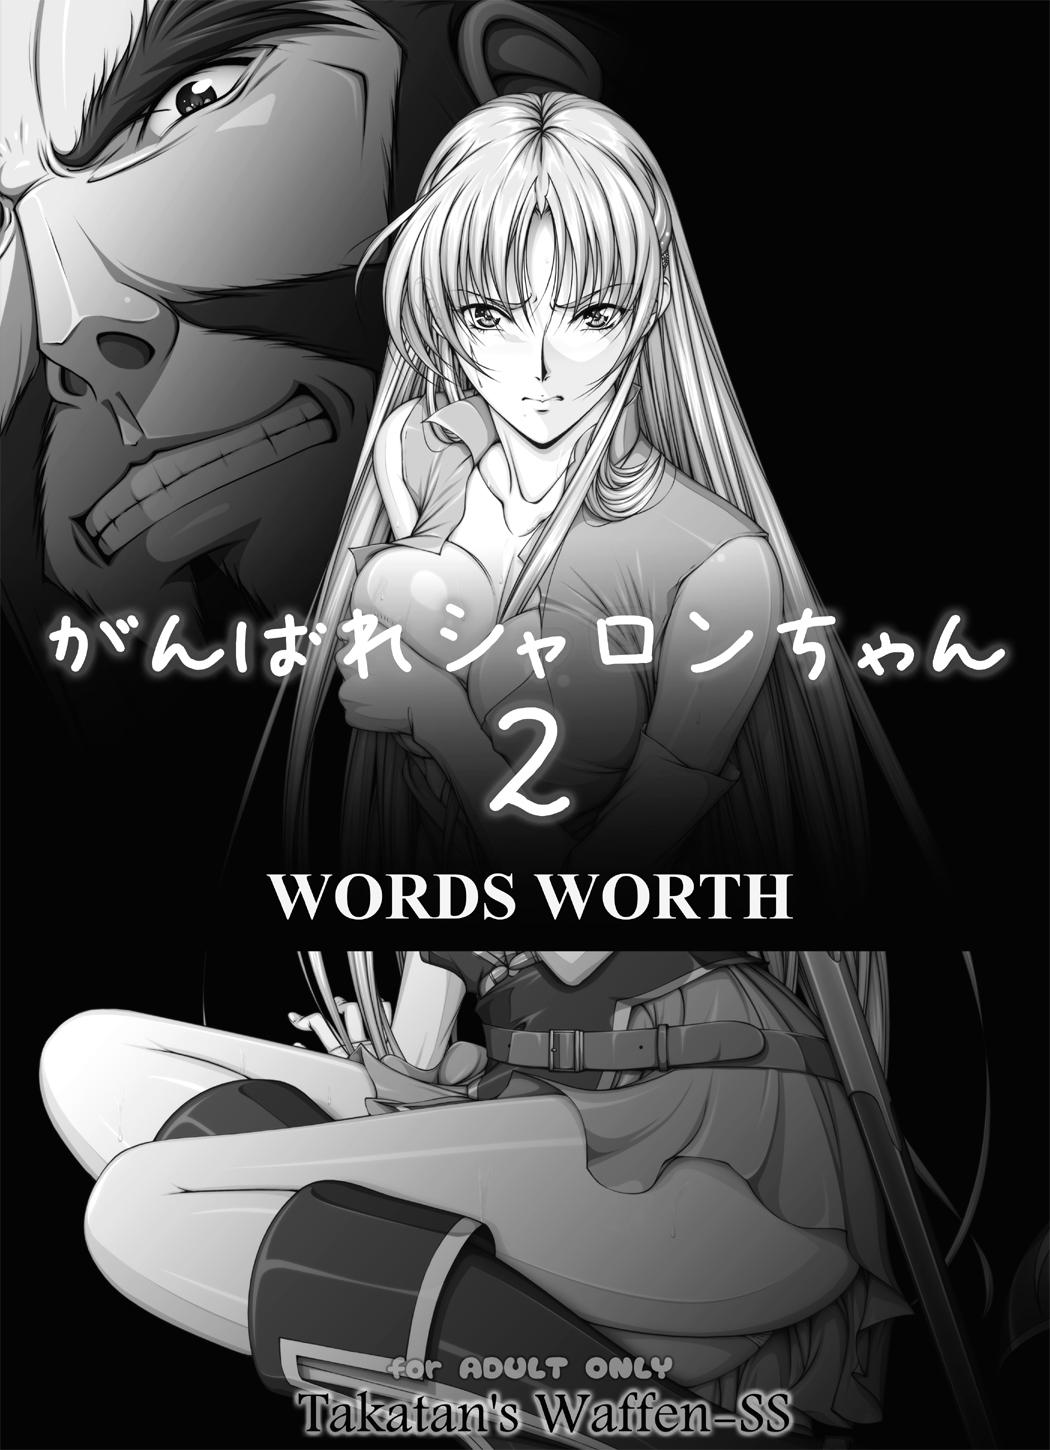 Camshow [Takatan's Waffen-SS] Fight, Sharon! 2 [Deluxe Edition] (Words Worth) +omake - Words worth Cum Swallow - Page 8